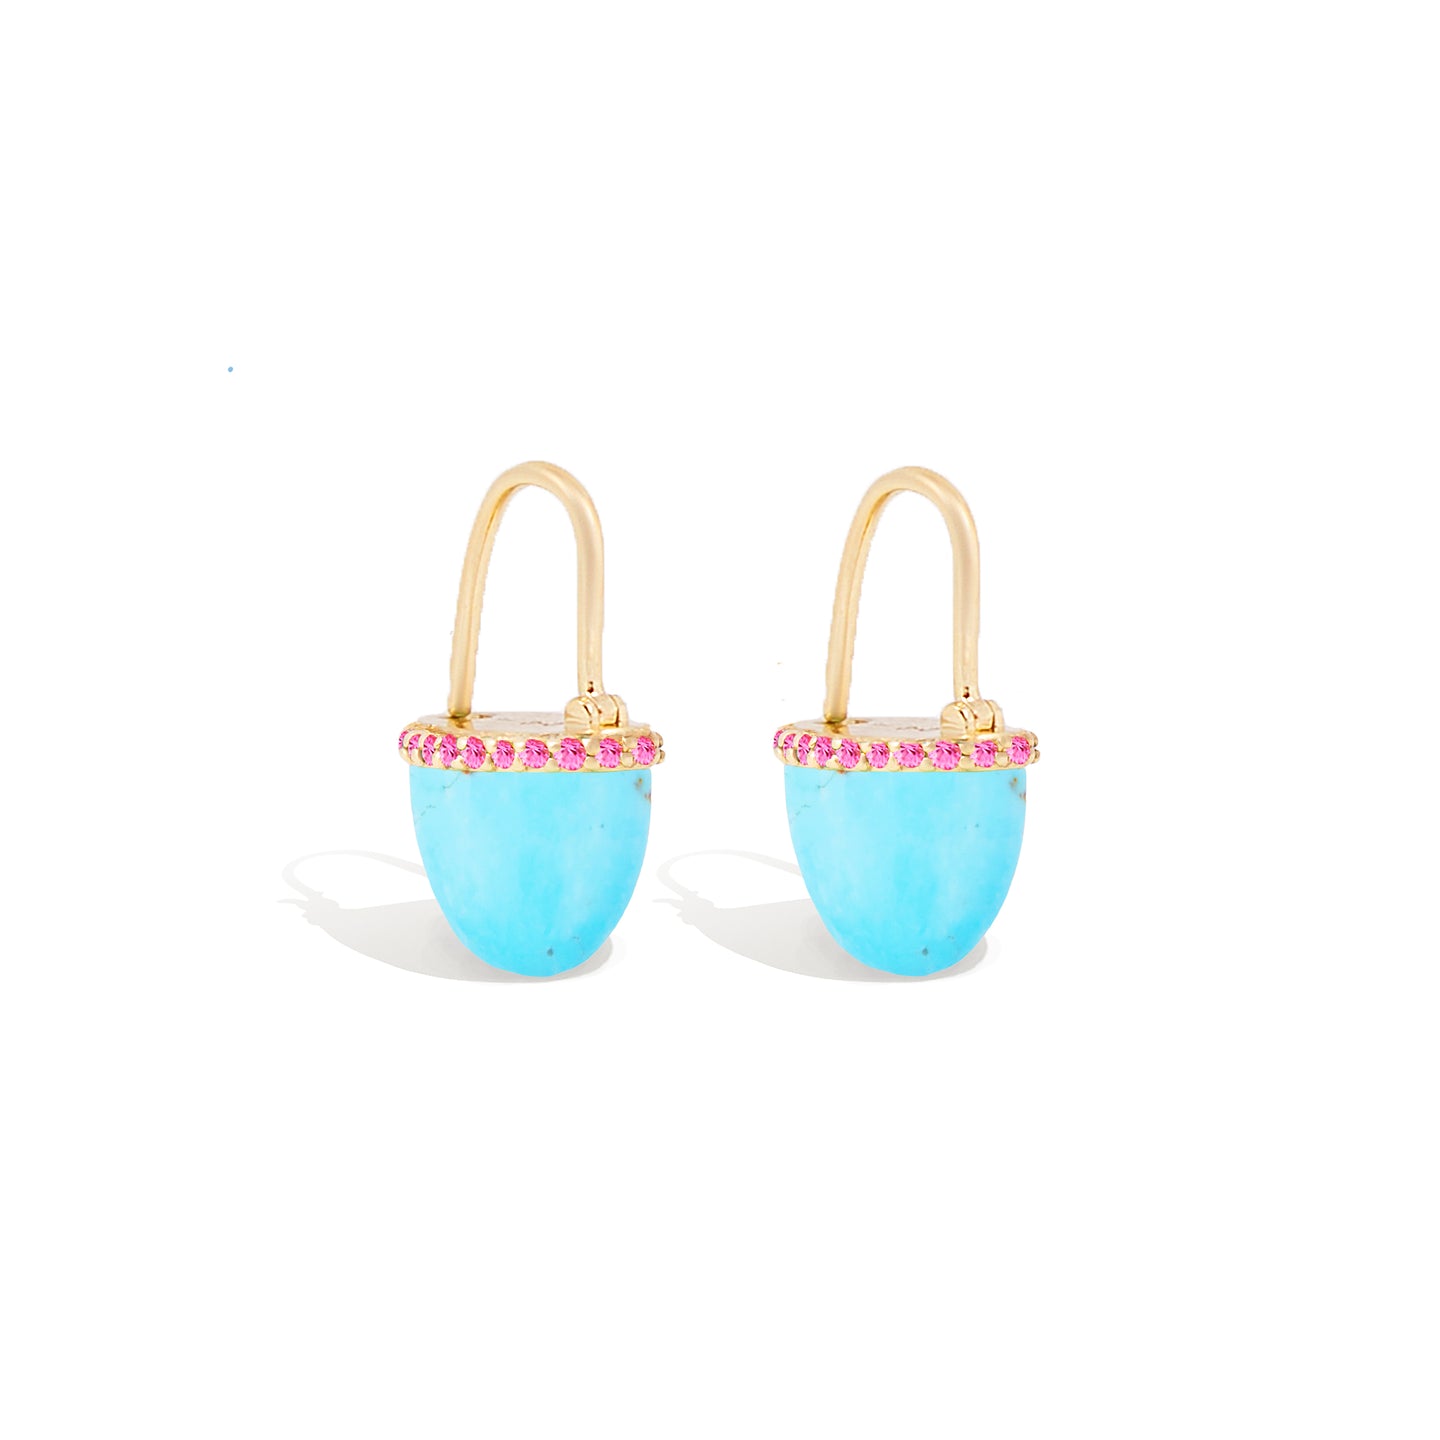 Found Cap Huggie Earring - Turquoise & Pink Sapphire